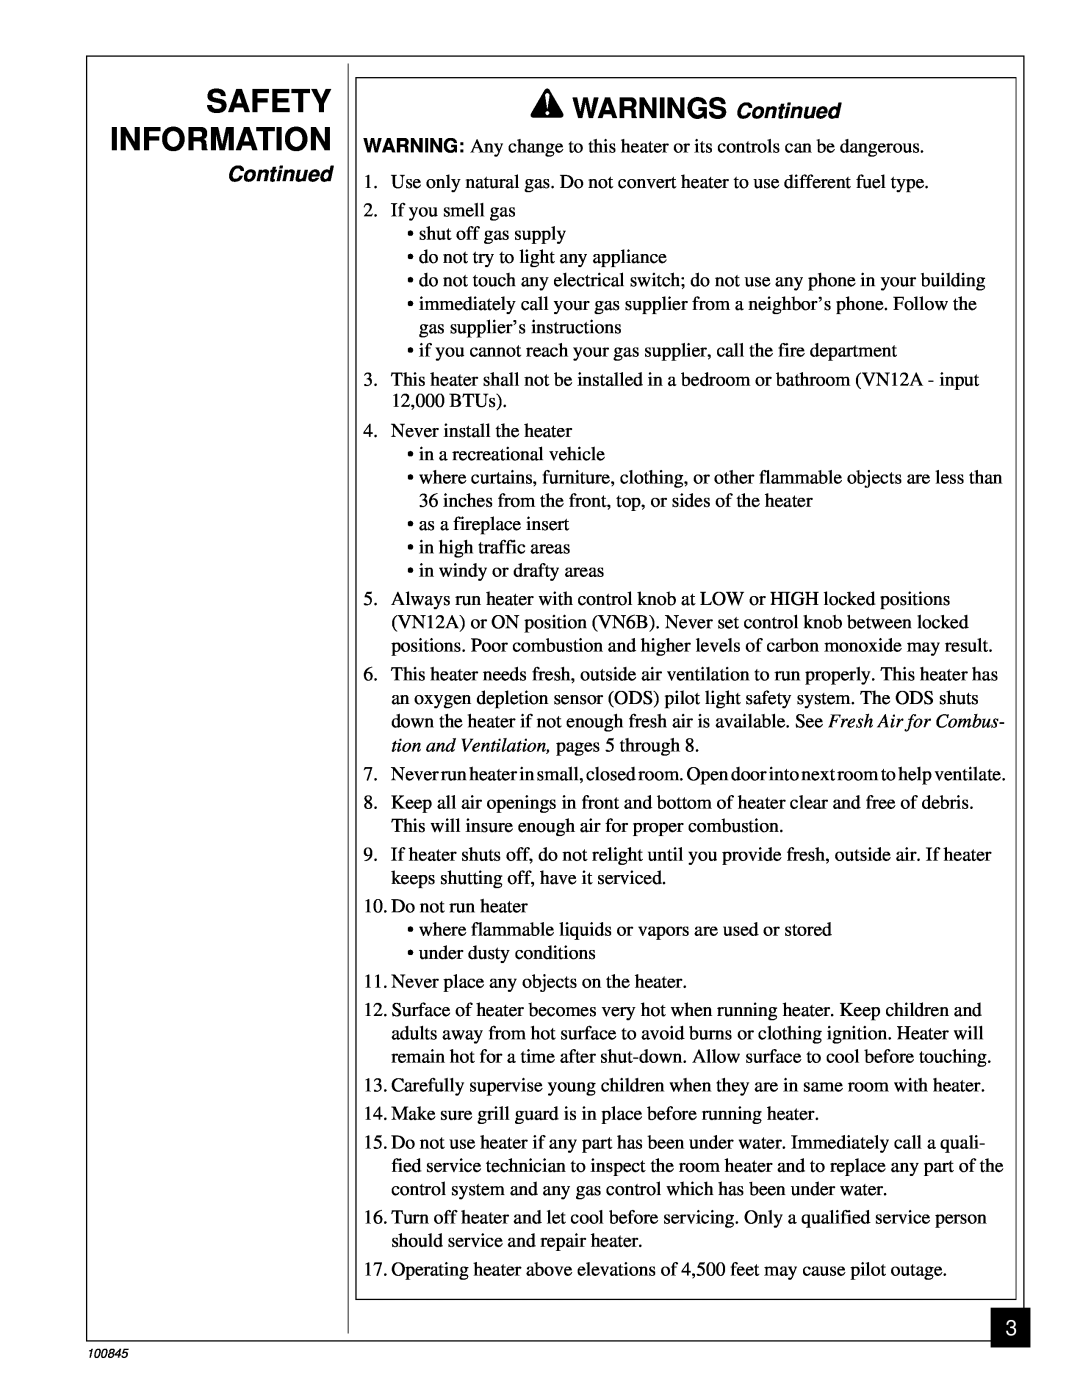 Vanguard Heating VN6B, VN12A installation manual Safety Information, WARNINGS Continued 